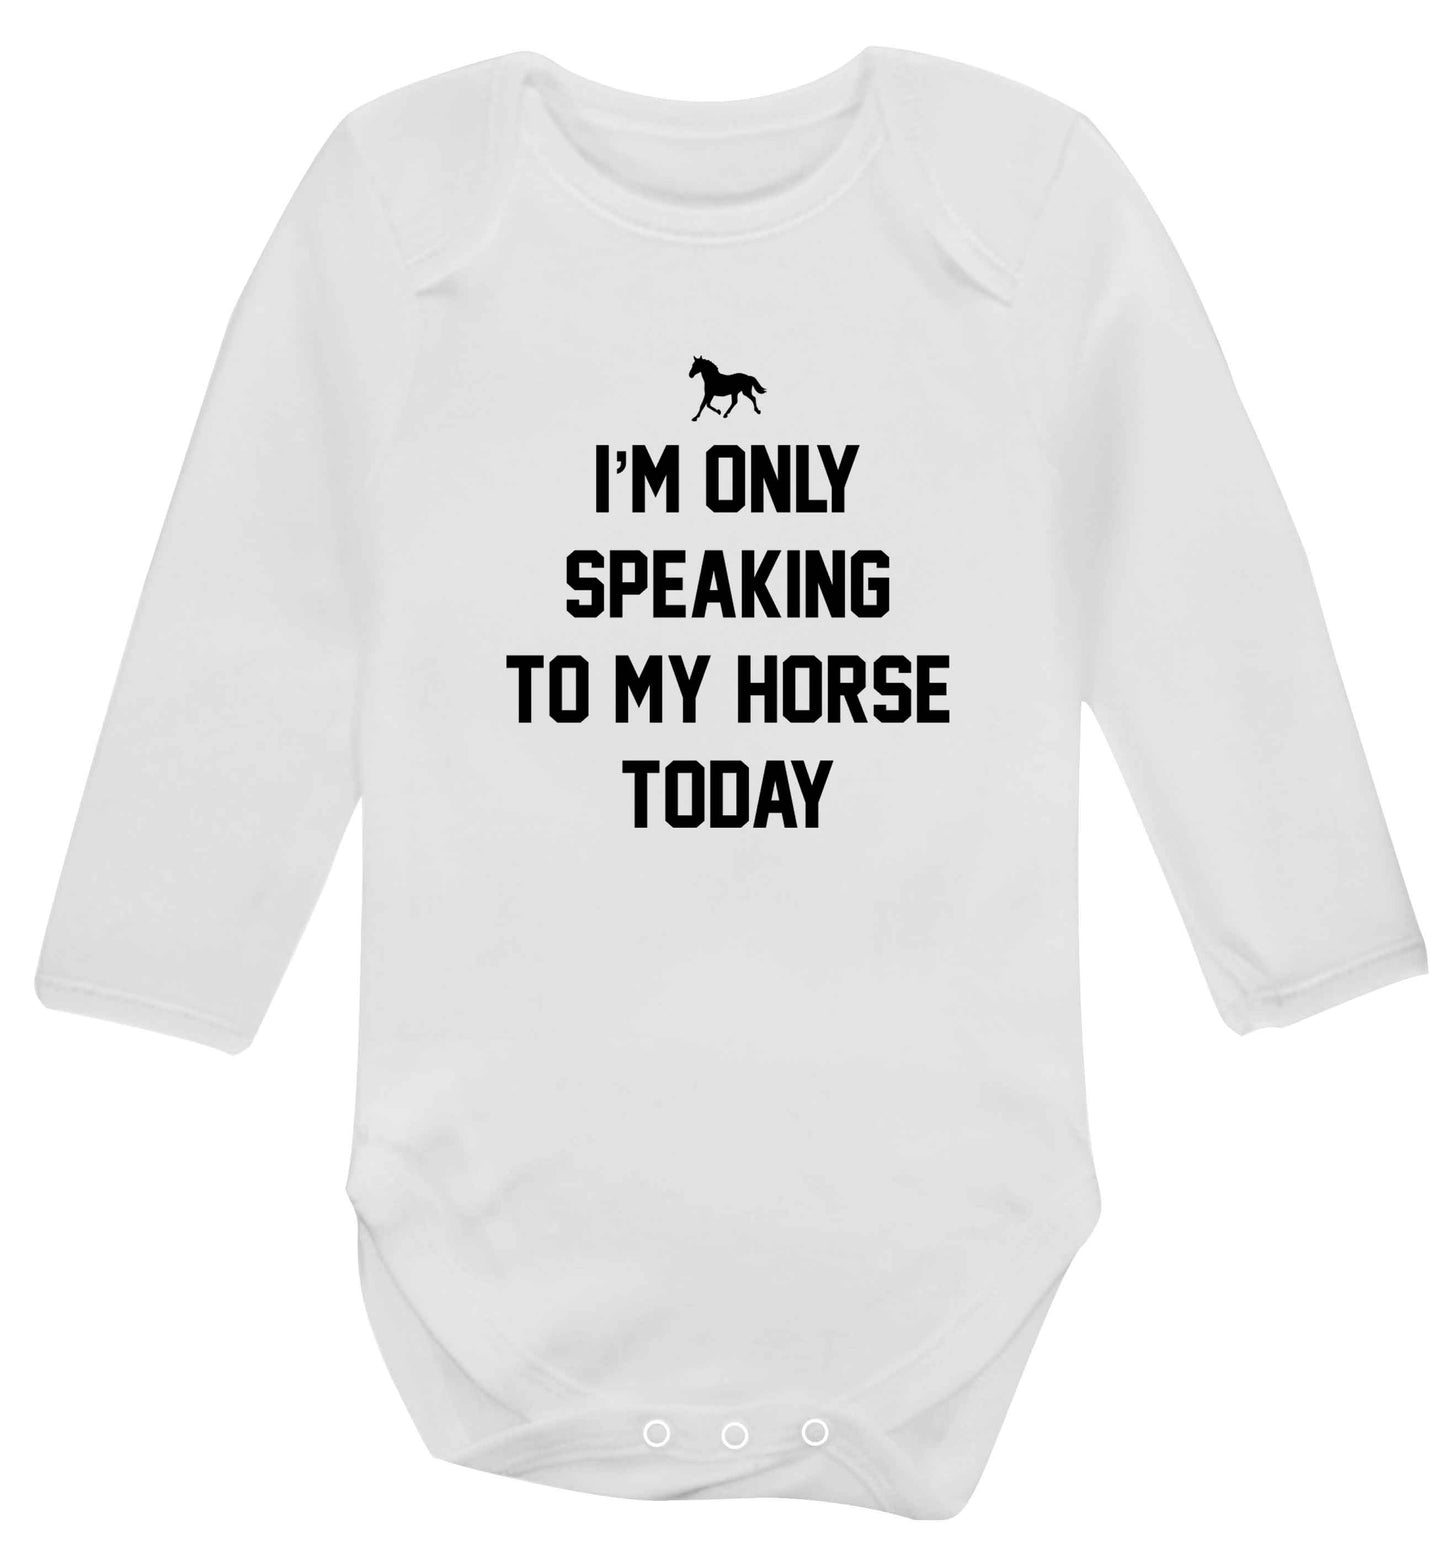 I'm only speaking to my horse today baby vest long sleeved white 6-12 months